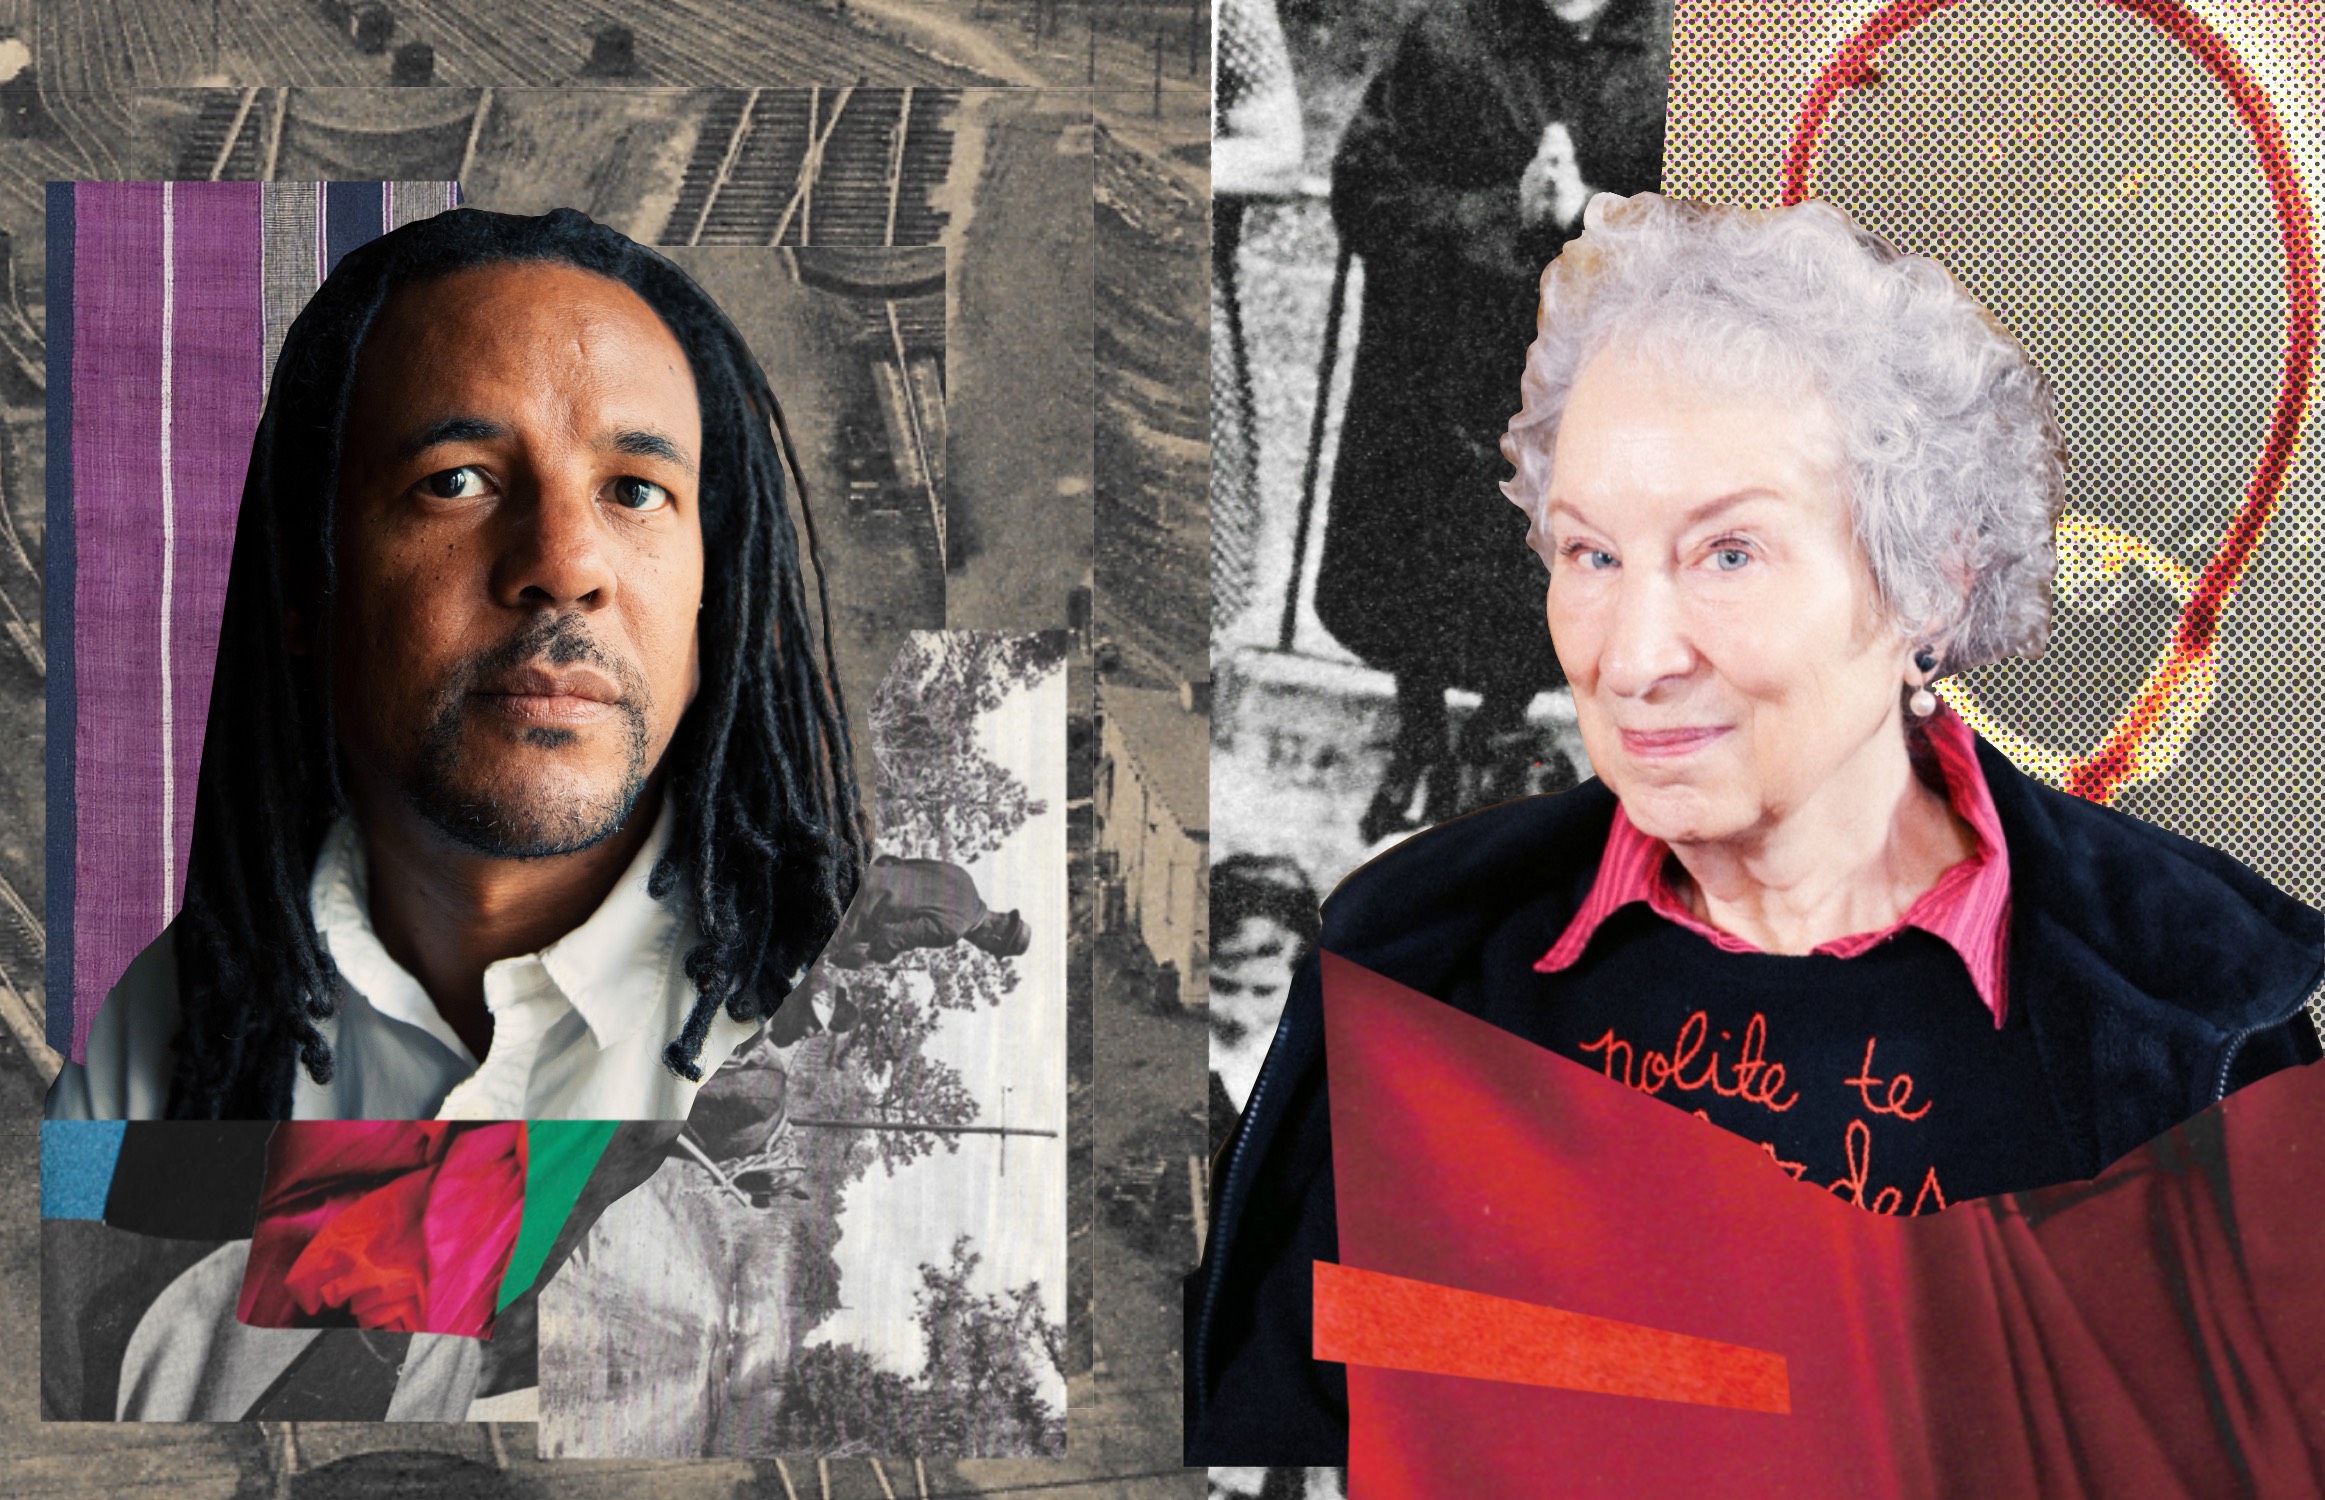 Colson Whitehead, author of The Underground Railroad, and Margaret Atwood, author of The Handmaid's Tale (Illustration by Aaron Marin for TIME; Whitehead: Getty Images; Atwood: Redux)